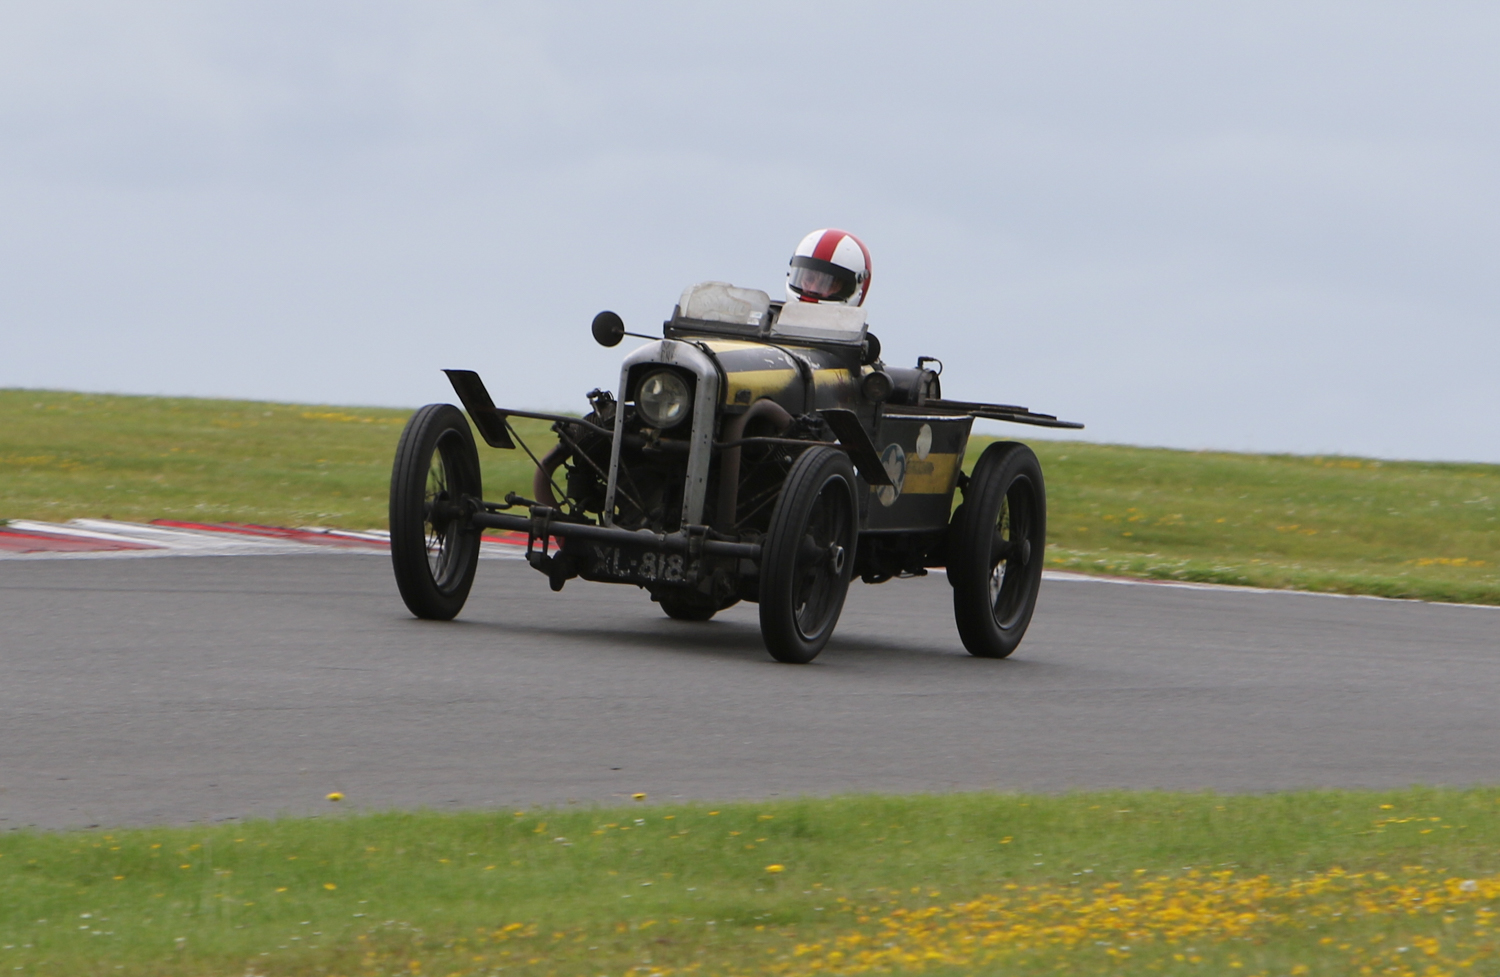 THE IRREPRESSIBLE MARK WALKER LEAVES THE GOOSENECK IN HIS 1922 GN THUNDERBUG. Picasa